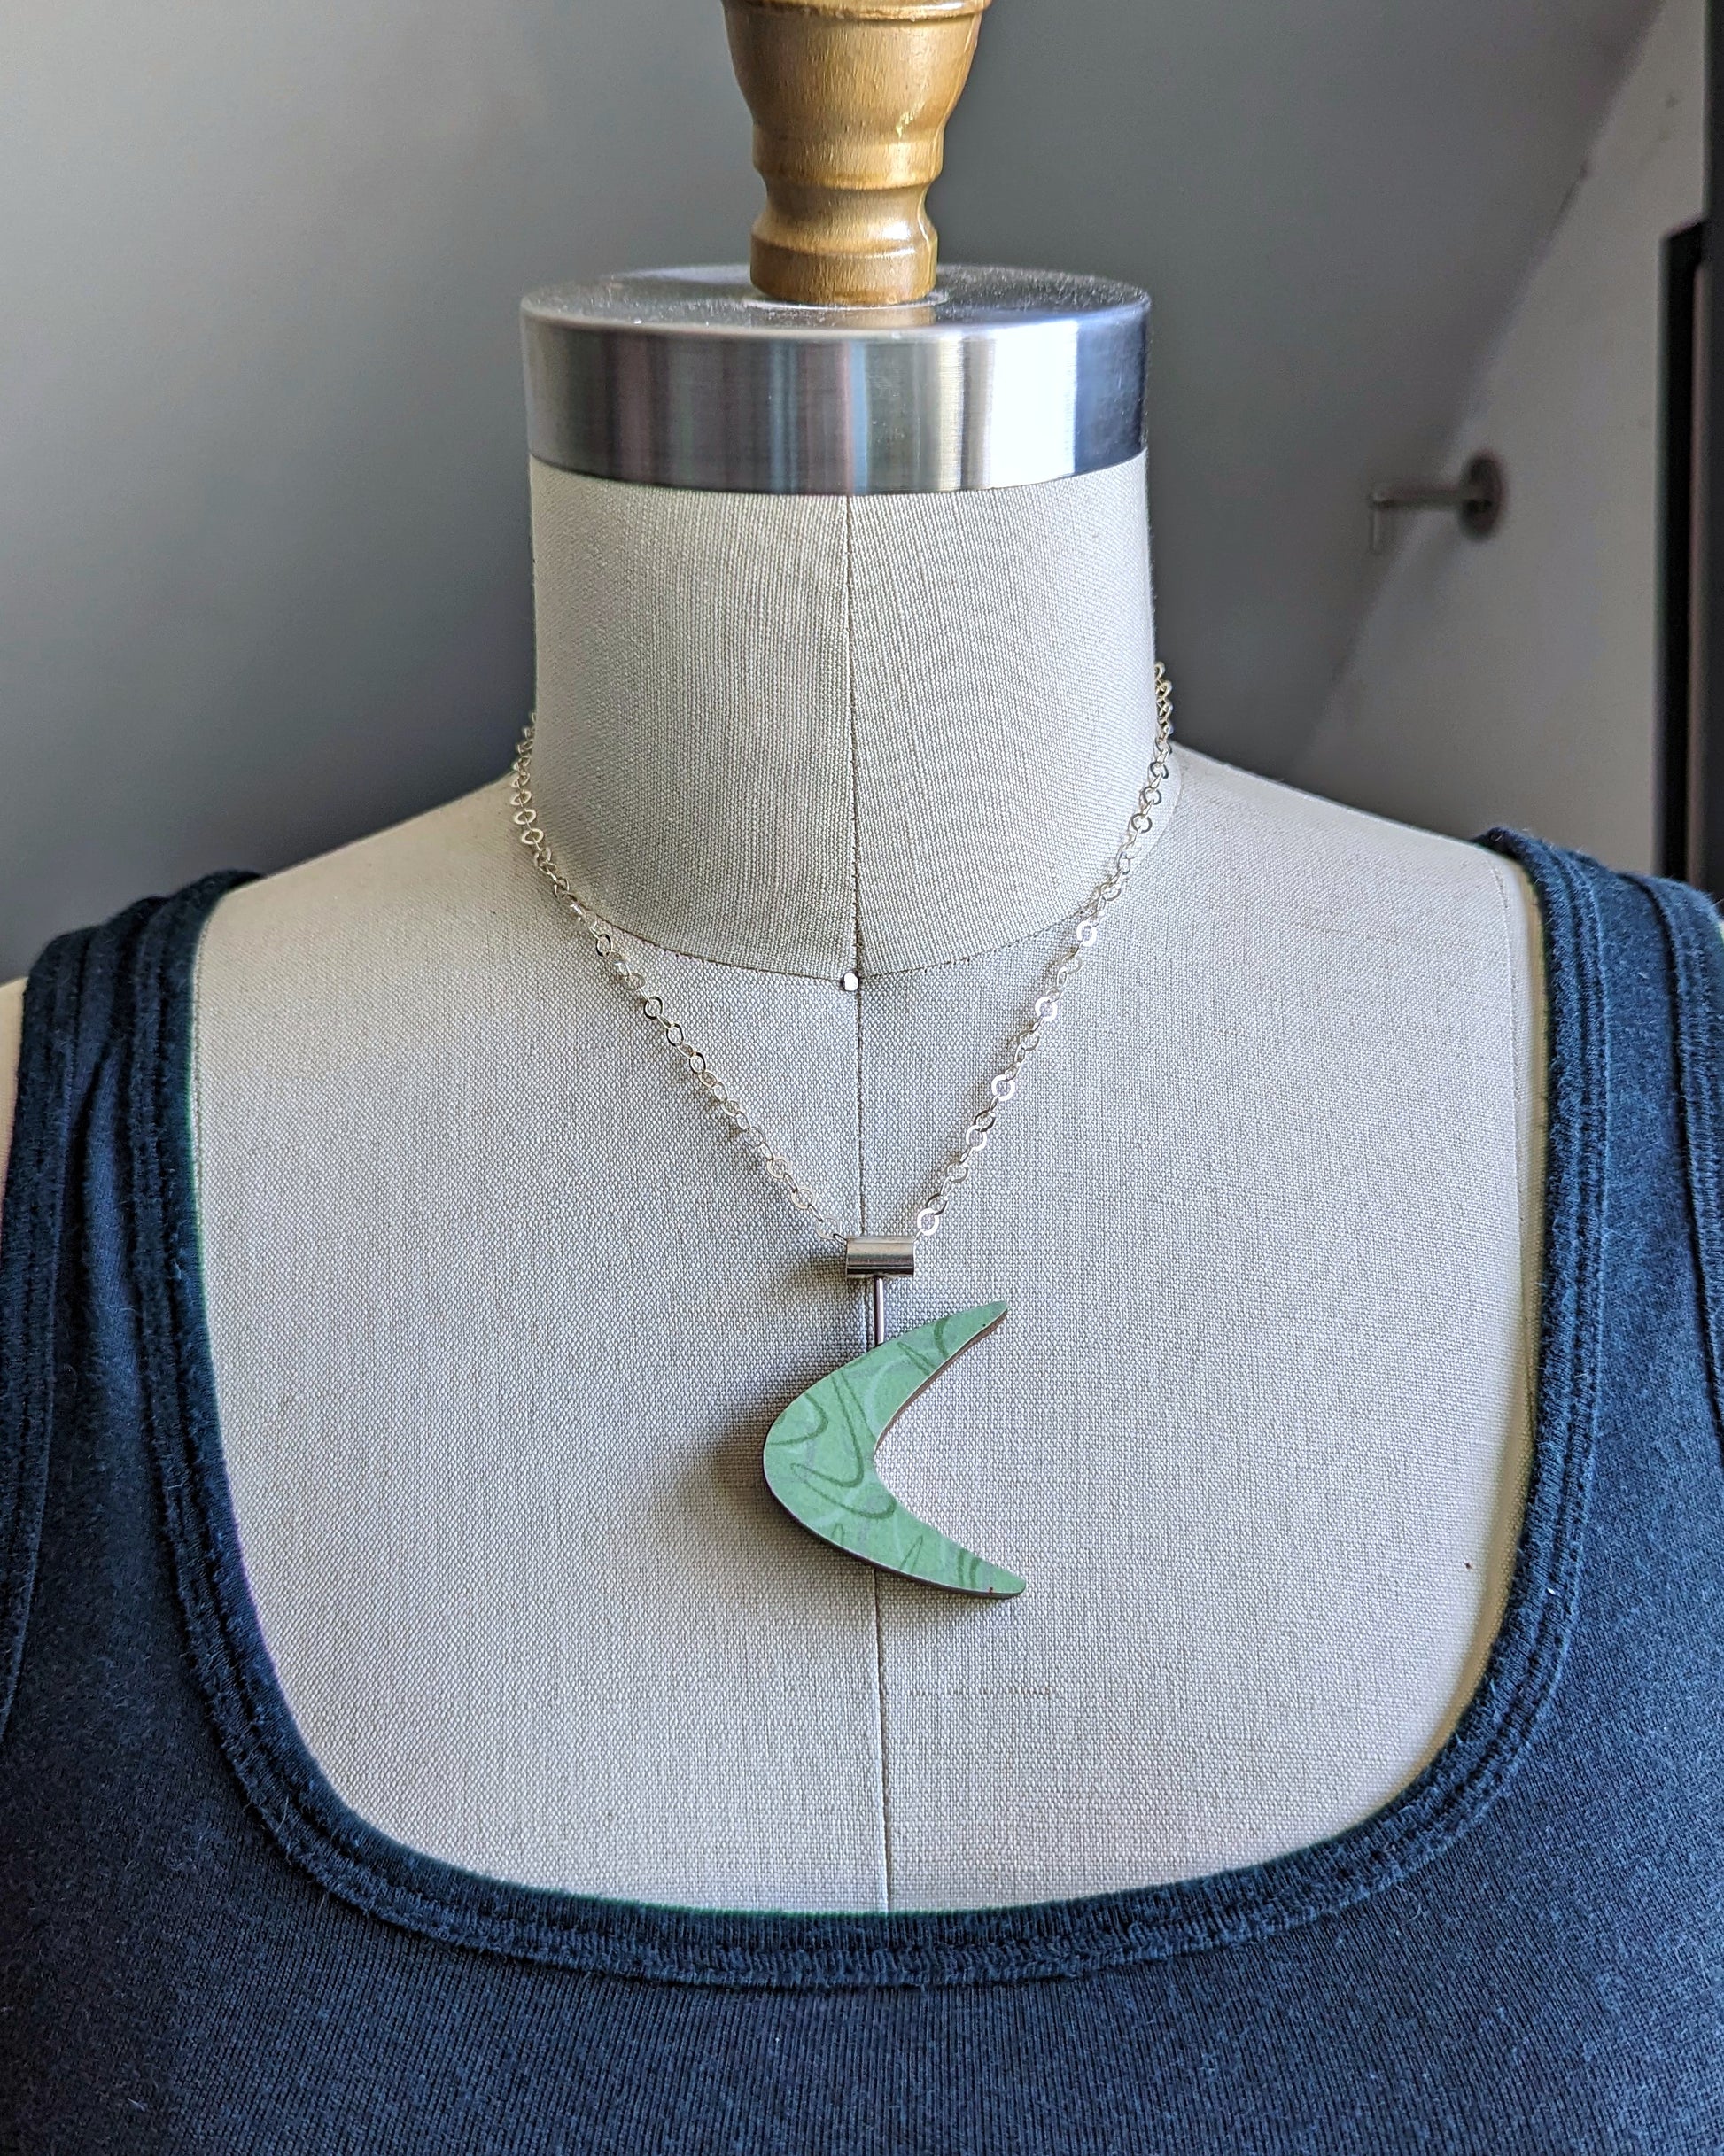 Boomerang shaped laminate on wood necklace on a dress form to see the size